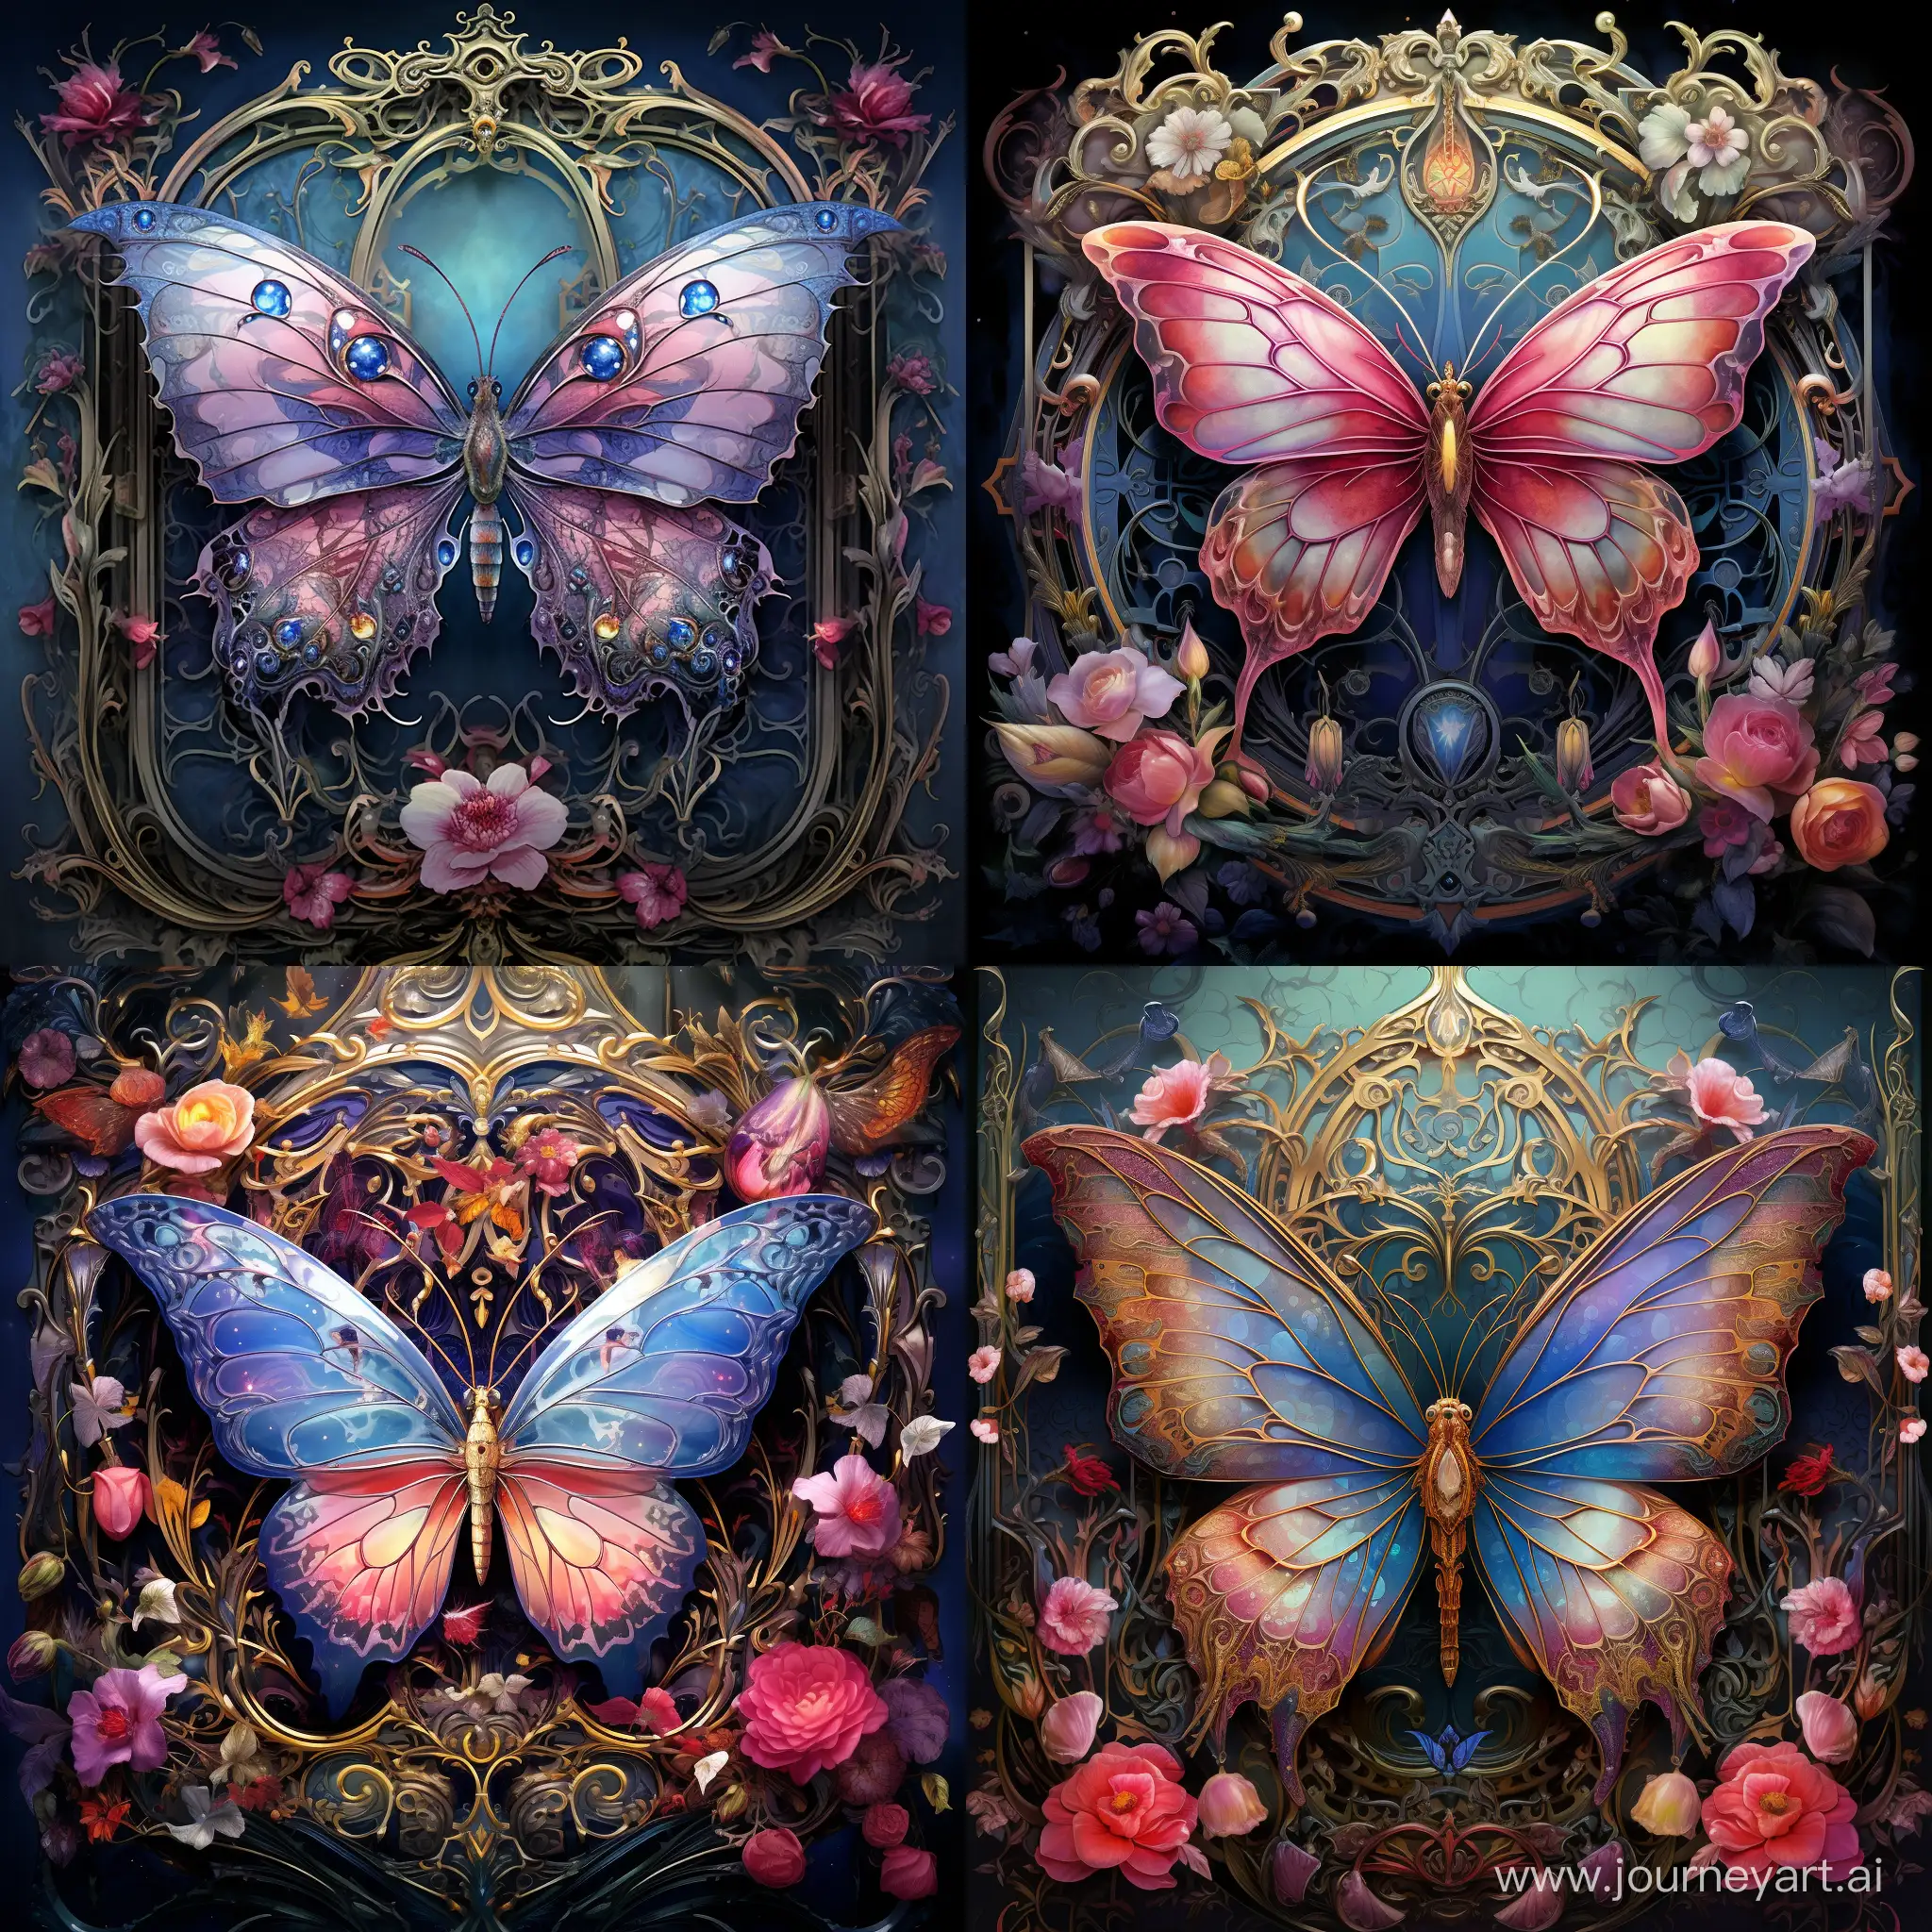 Enchanting-Fairytale-Scene-Stained-Glass-Moth-Amidst-Ruby-Peony-Flowers-and-Iridescent-Crystals